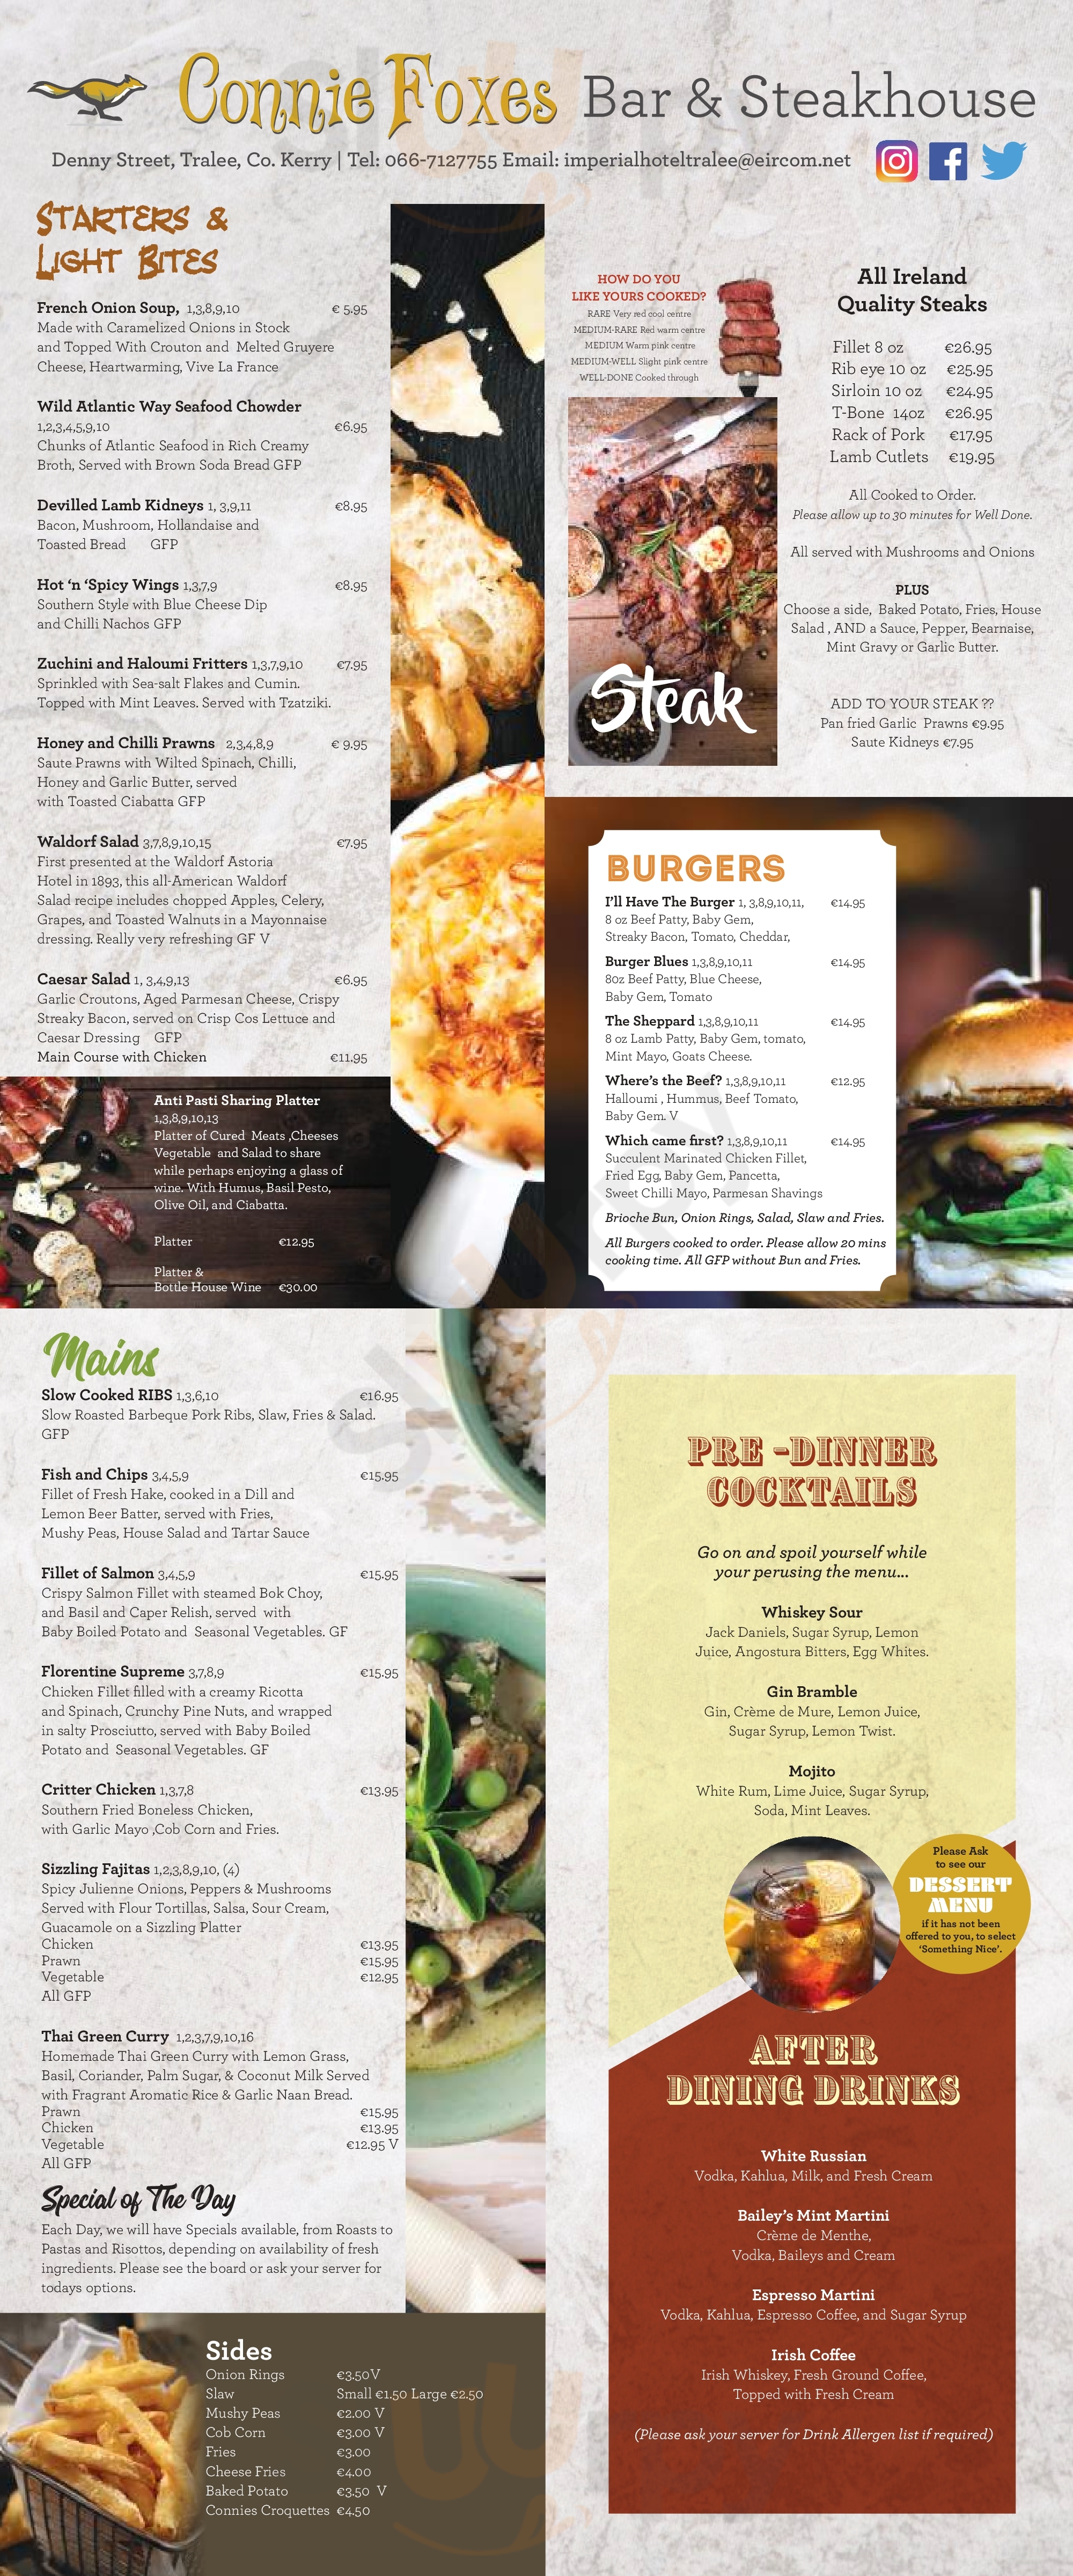 Connie Foxes Bar And Steakhouse @ The Imperial Hotel Tralee Menu - 1